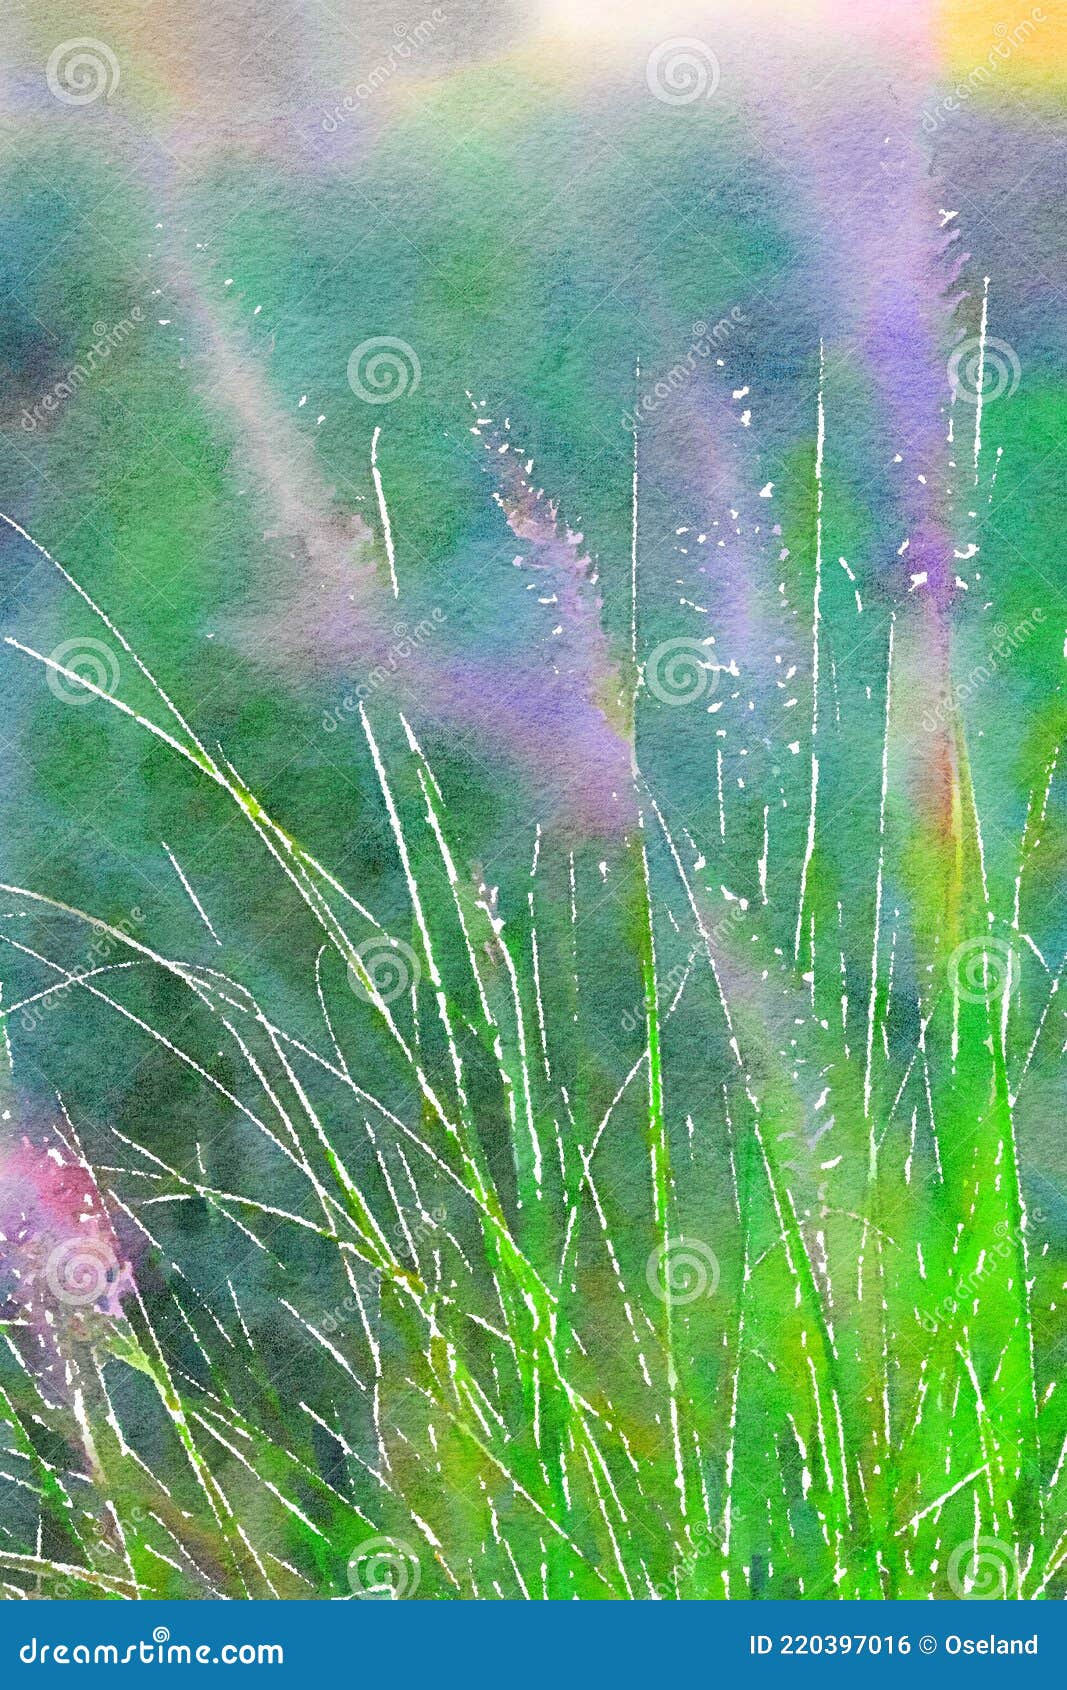 watercolor of ornamental grass with flower spikes. digitalart.